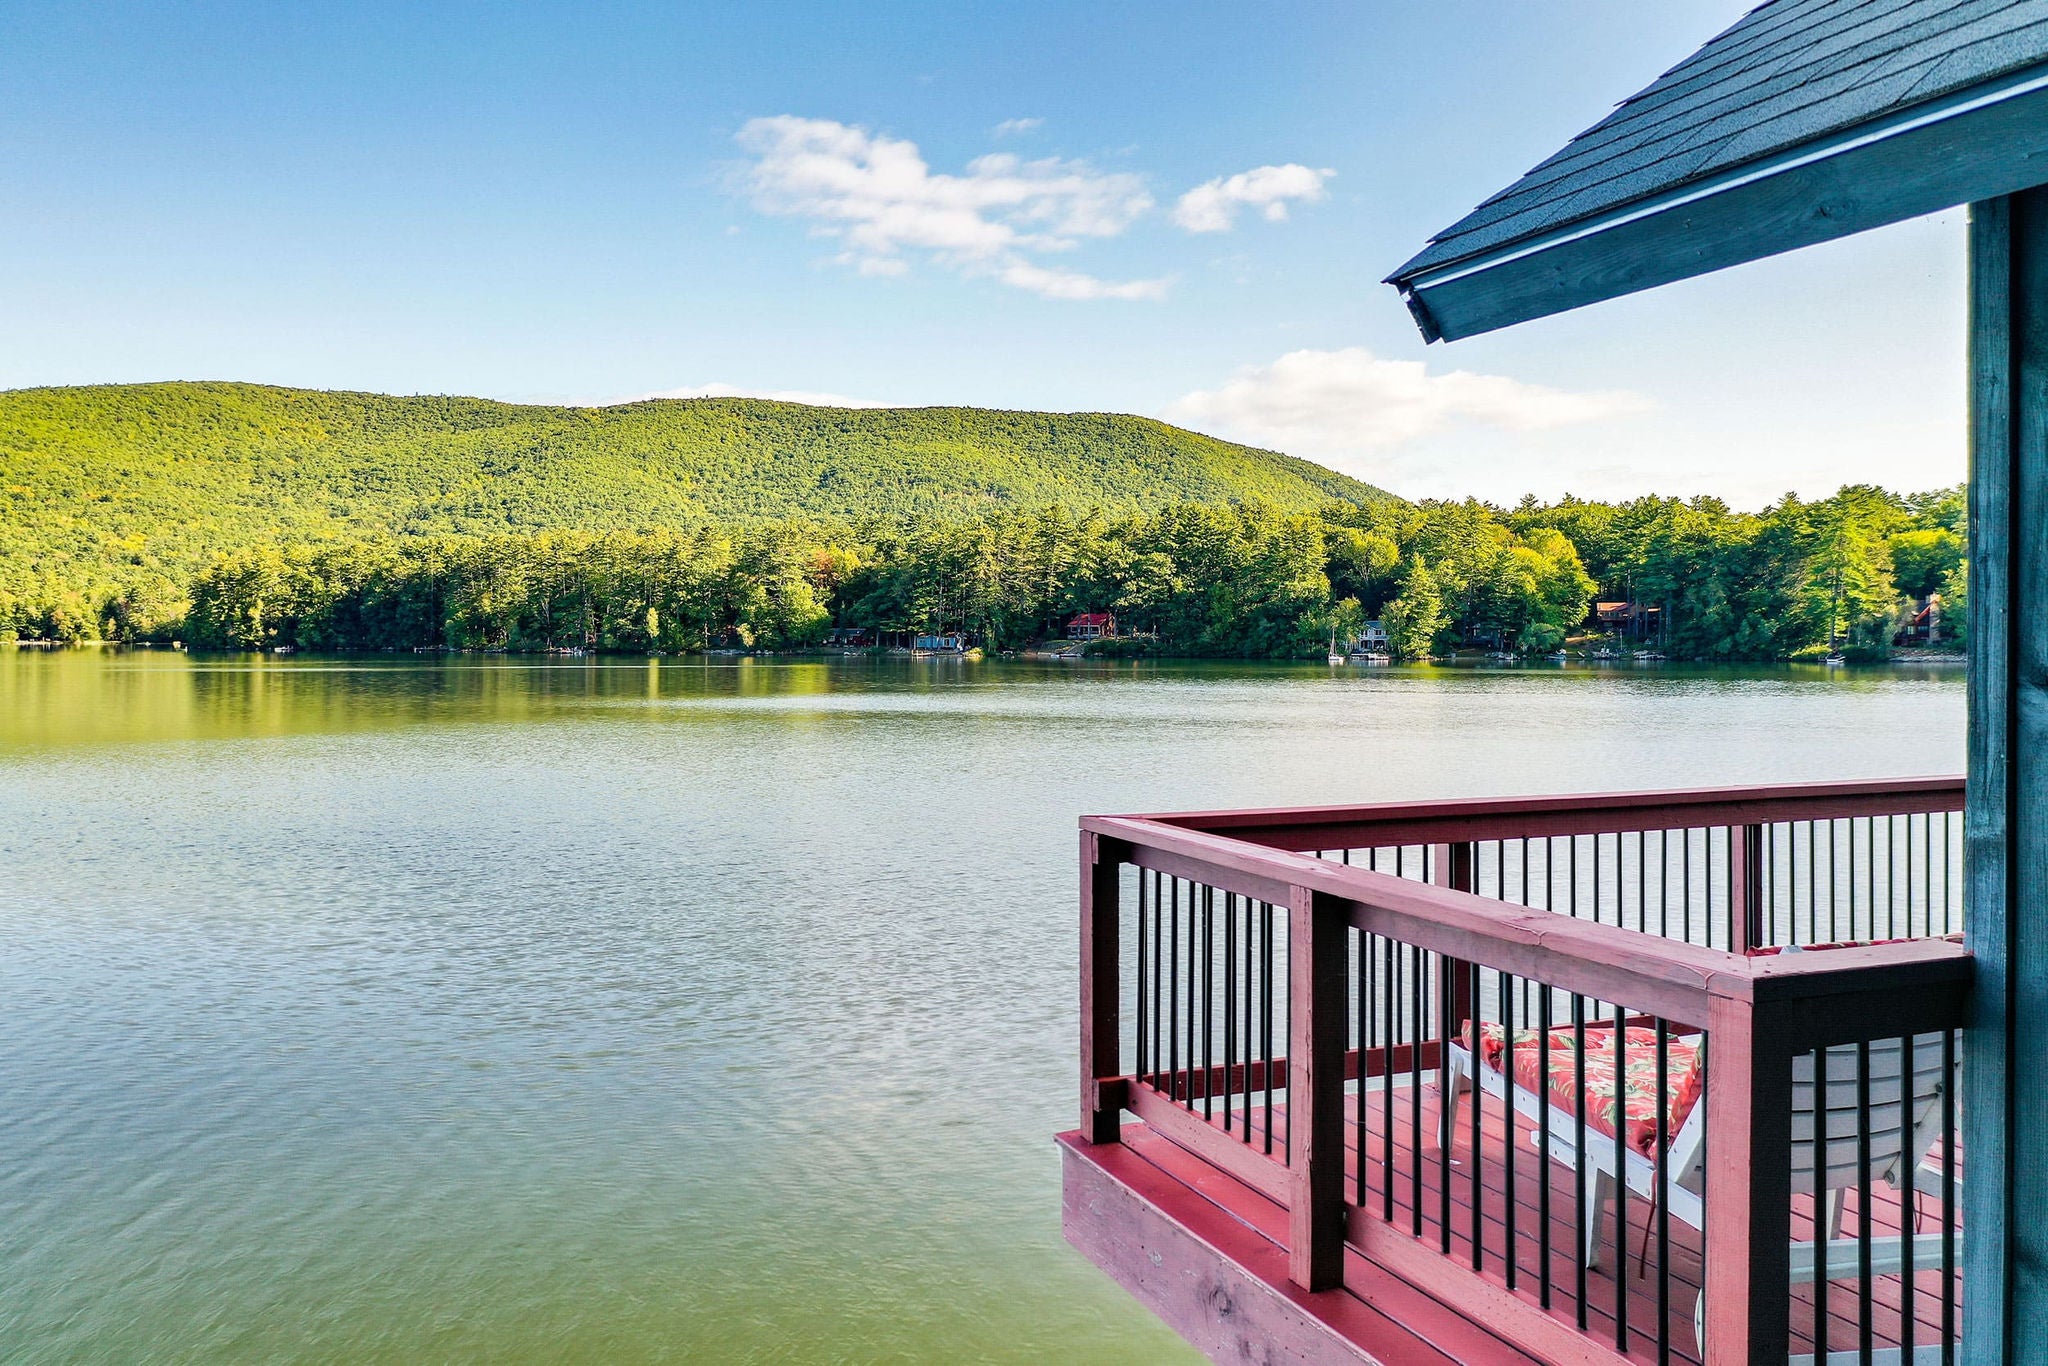 Vacation home in the Lakes Region of New Hampshire